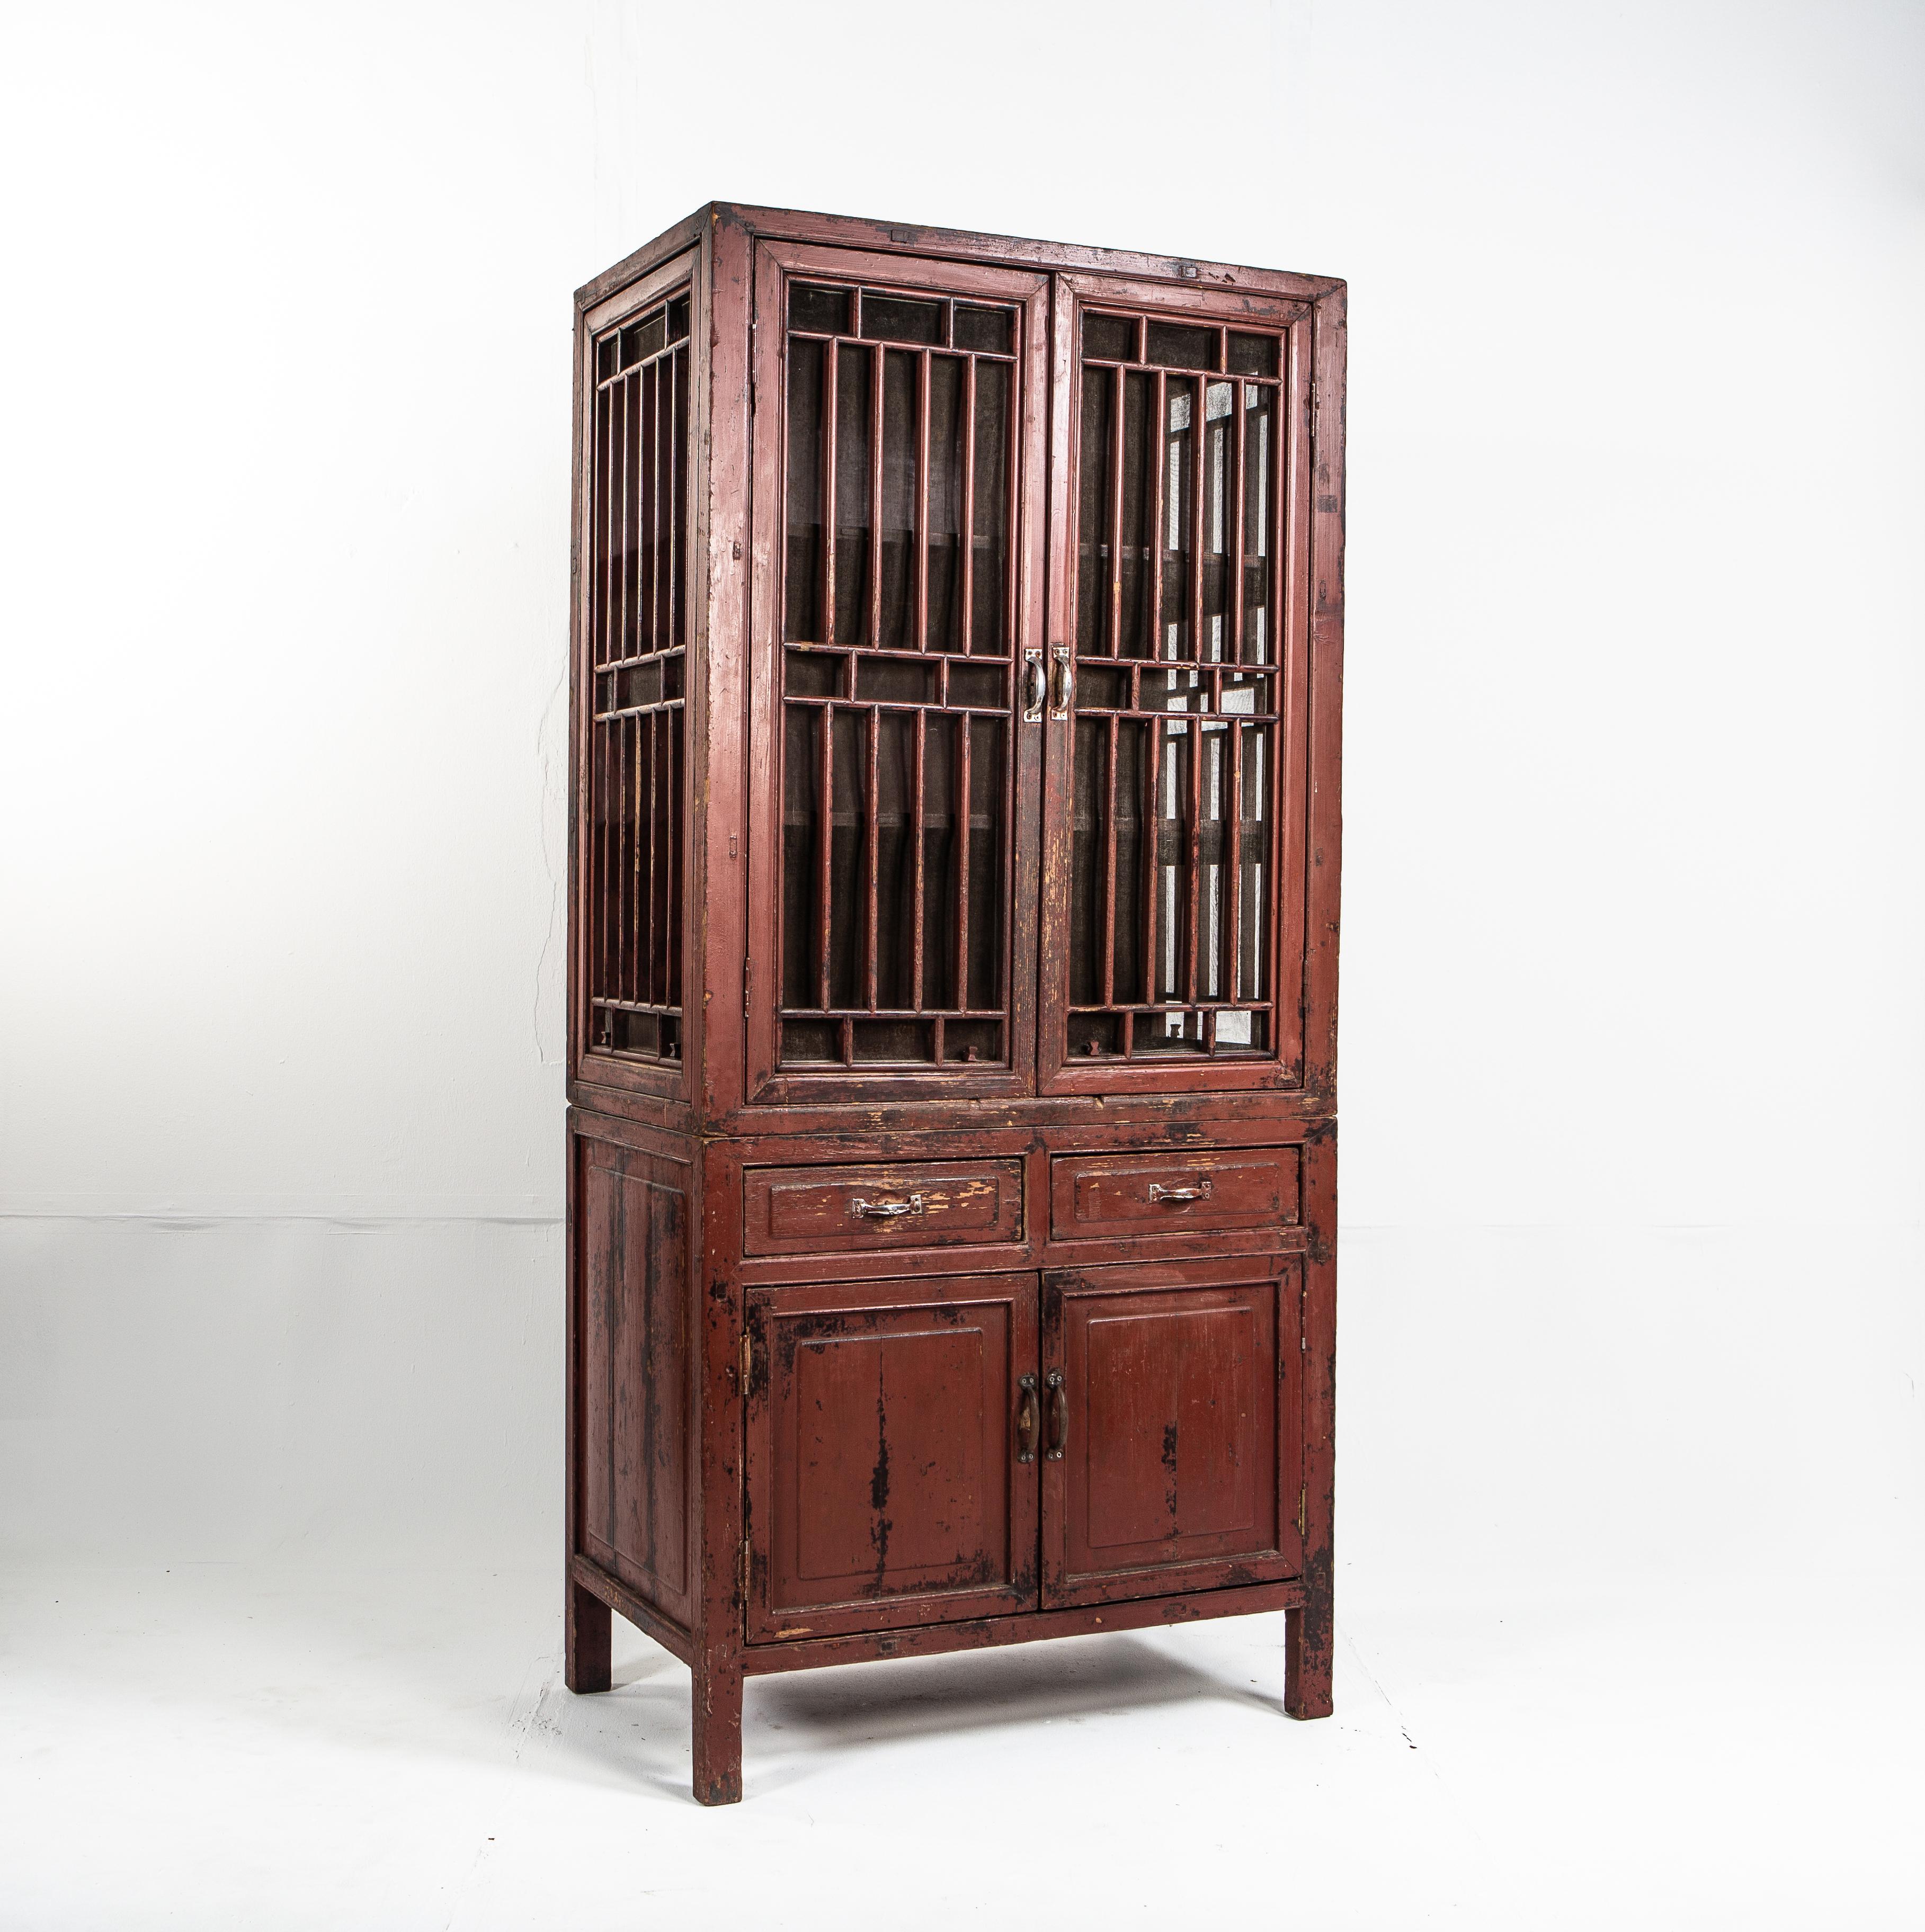 This lattice door cabinet came from Jiangsu, China and dates to the late 1900s. It was originally used to provide extra storage in the dining or sleeping areas of a home. It is made from Fir wood, covered in cinnabar lacquer. Cinnabar is one of the